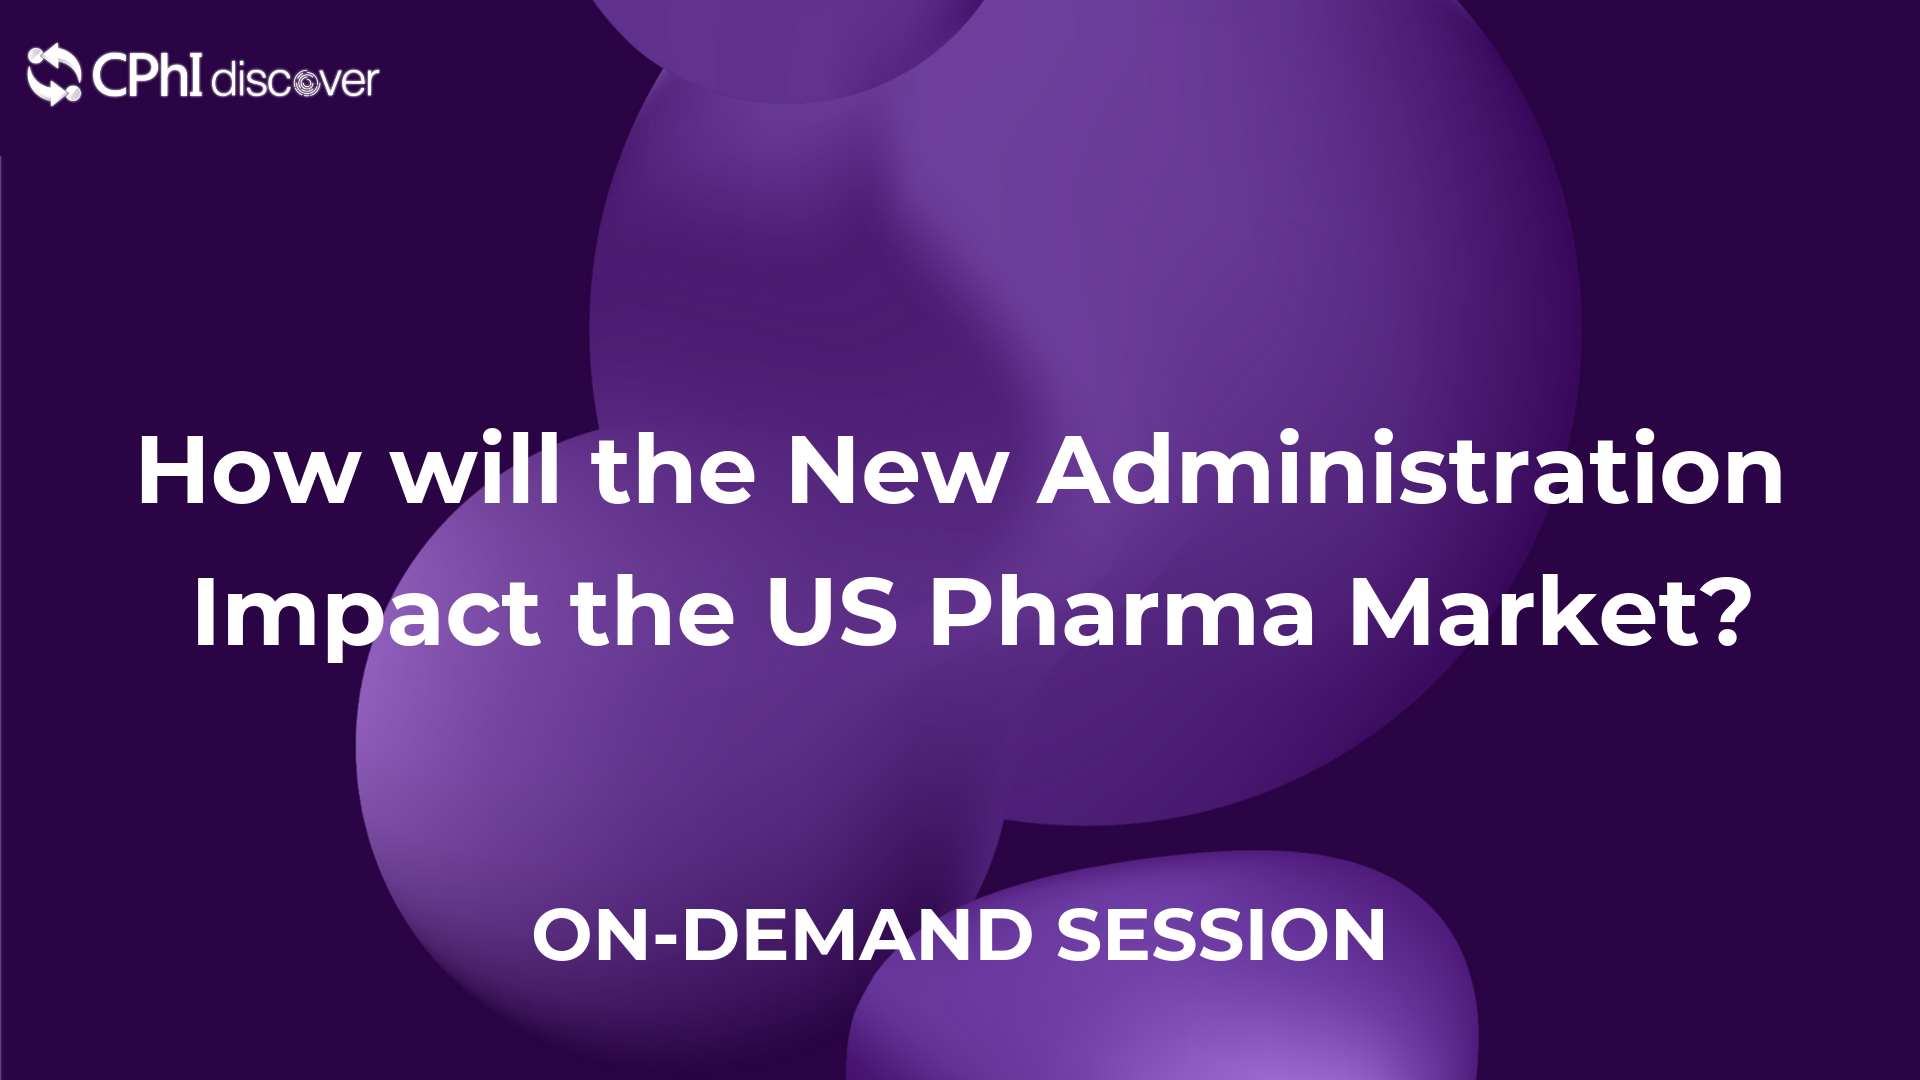 How will the New Administration Impact the US Pharma Market?